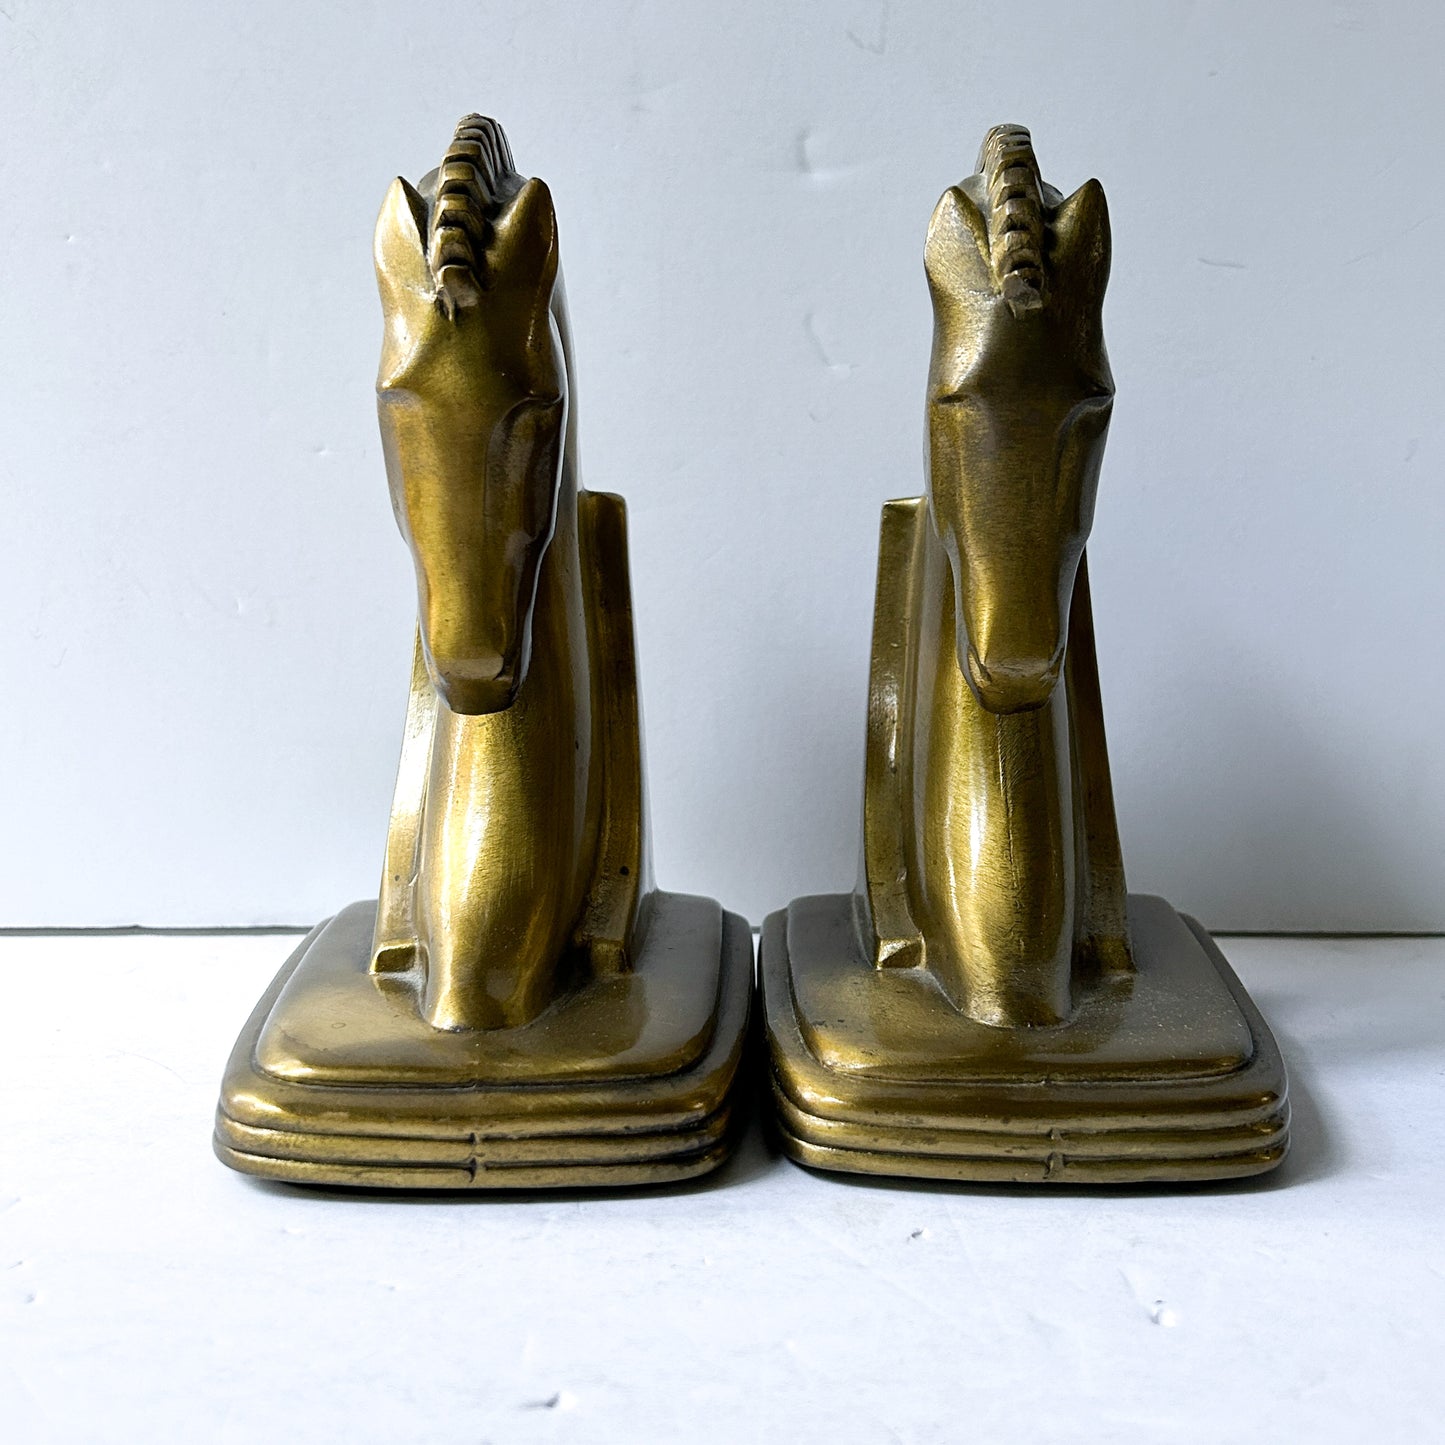 Vintage Art Deco Style Horse Head Bookends, Antiqued Brass Tone Lacquer Finish